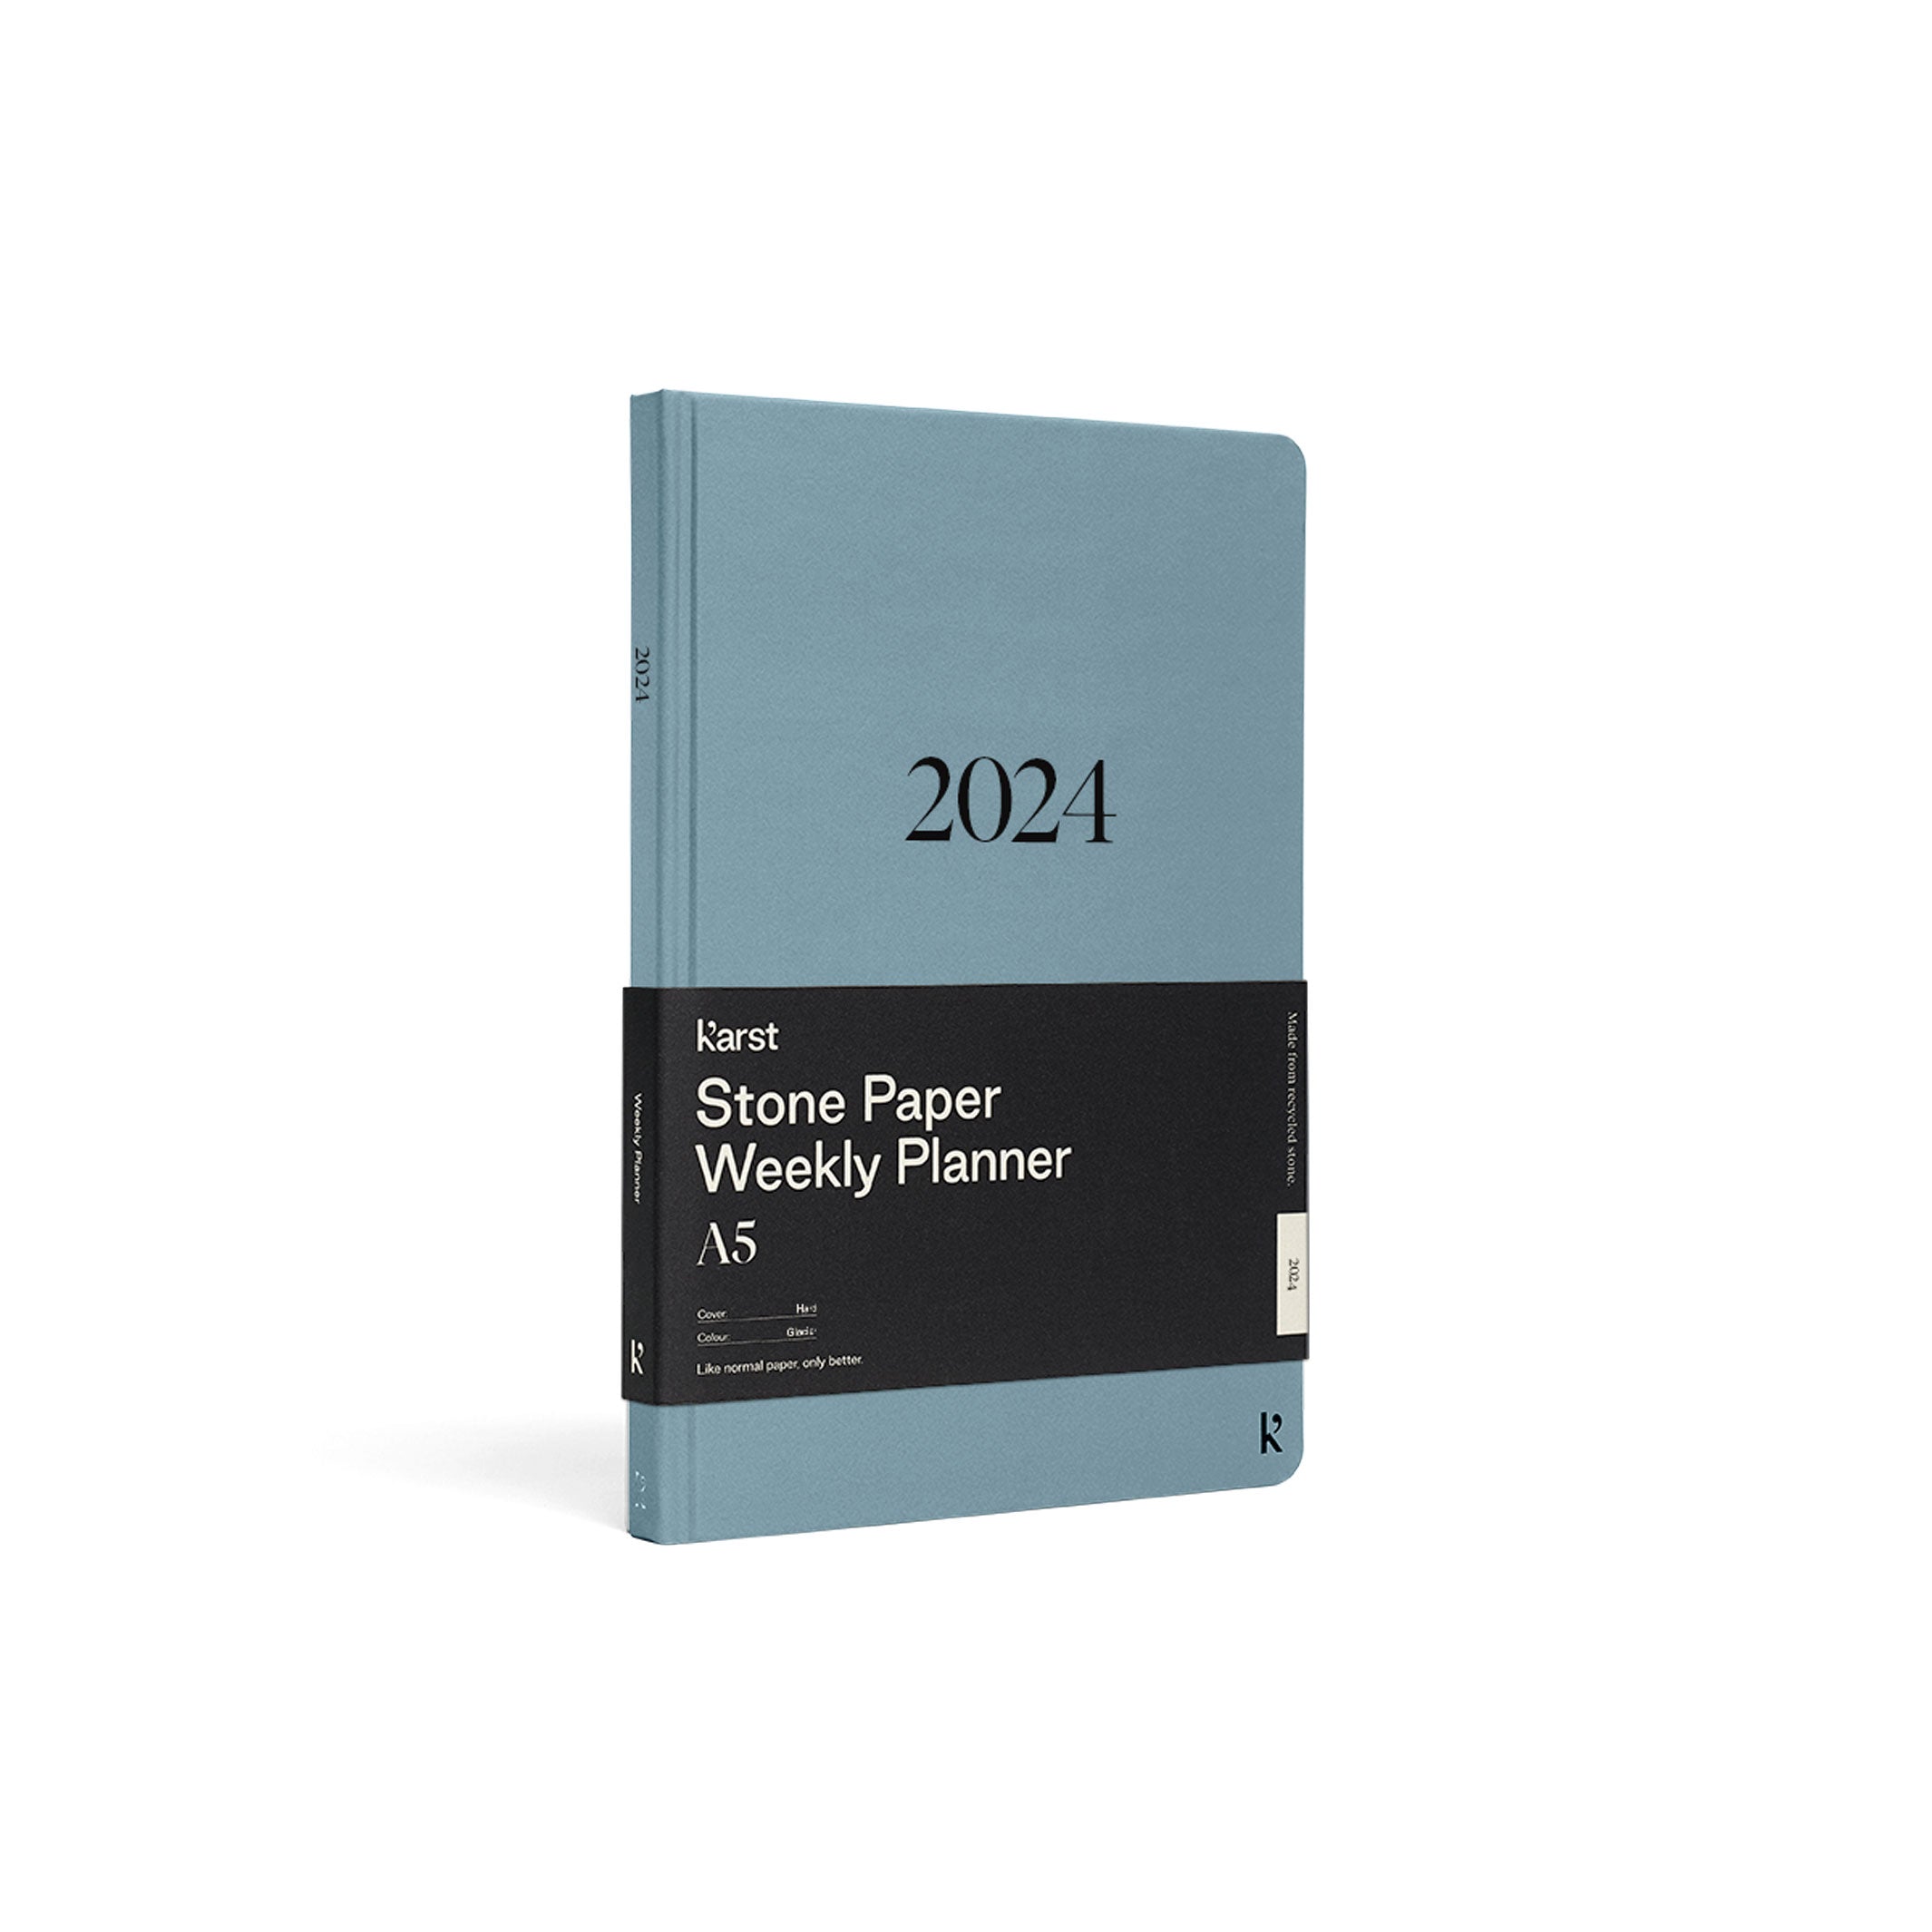 WEEKLY PLANNER 2024 | Hardcover A5 | Karst Stone Paper